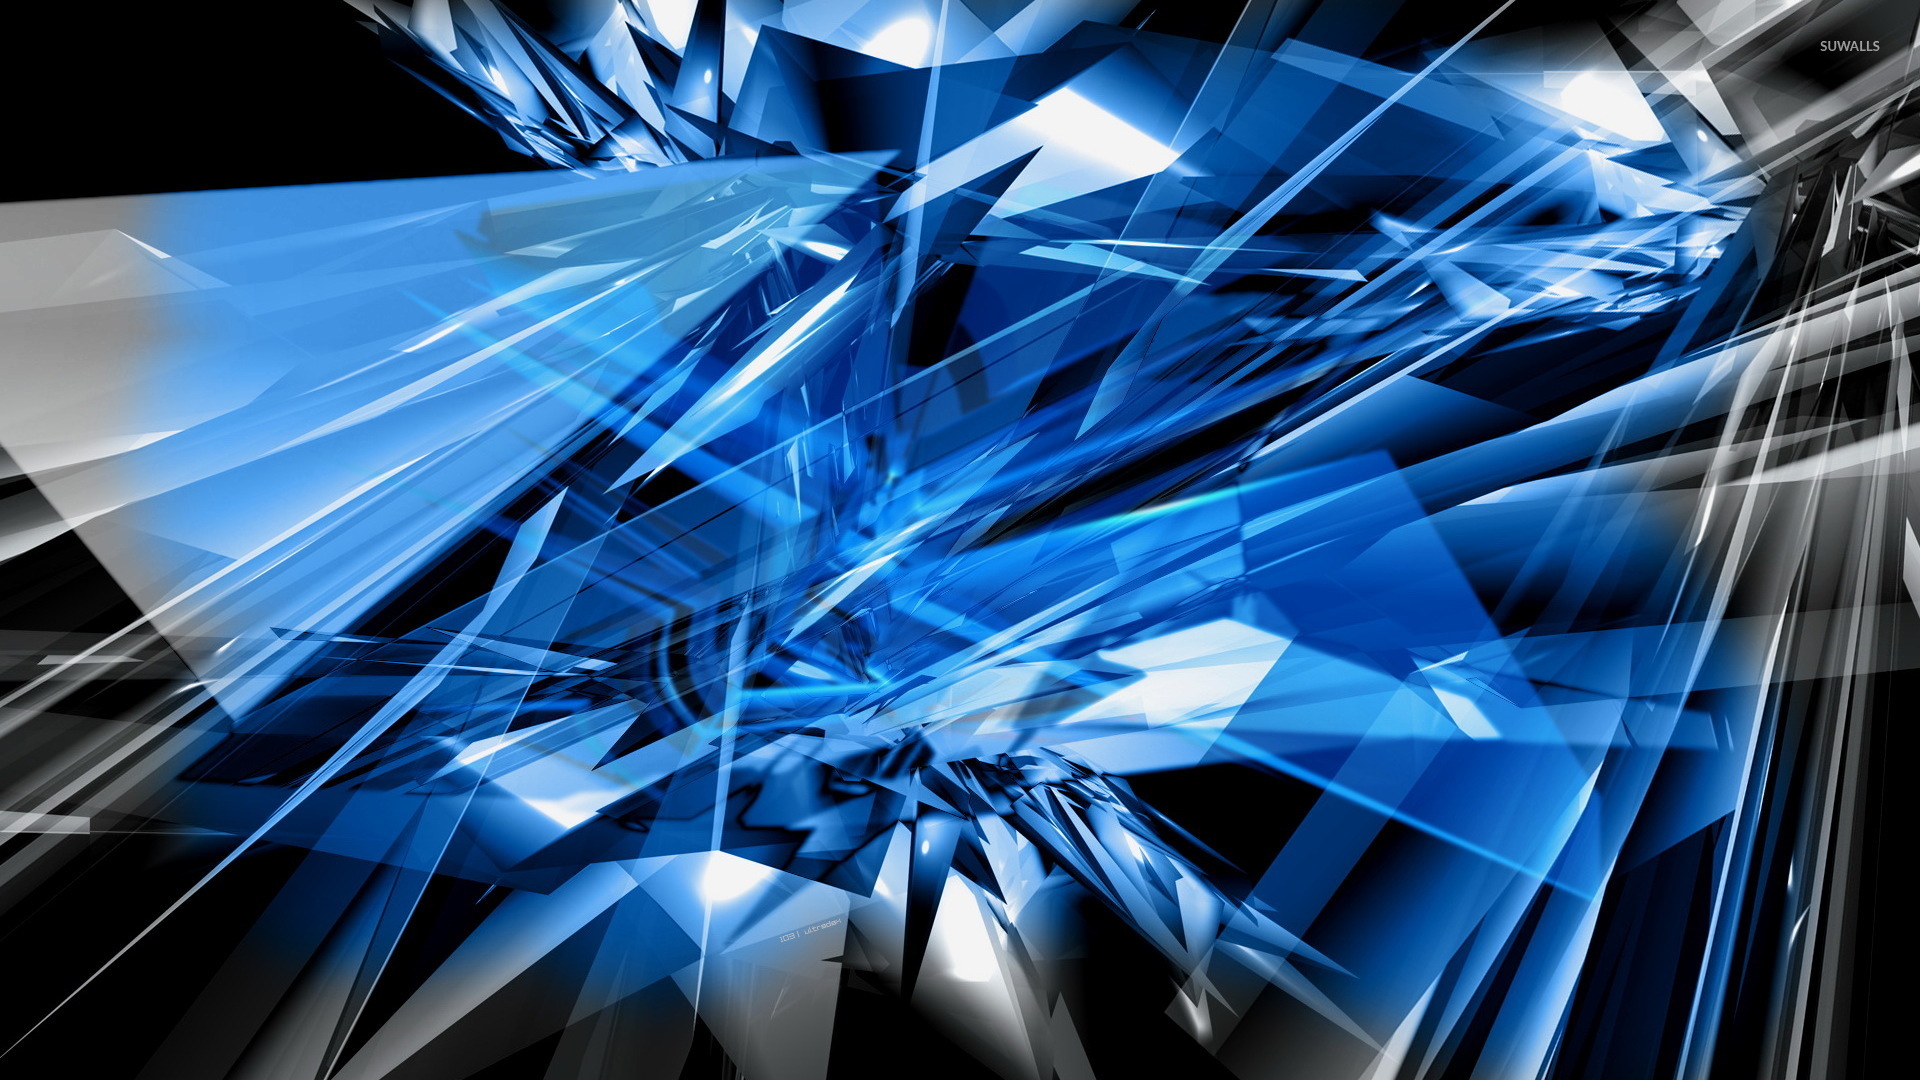 Glass Shards Wallpaper Abstract